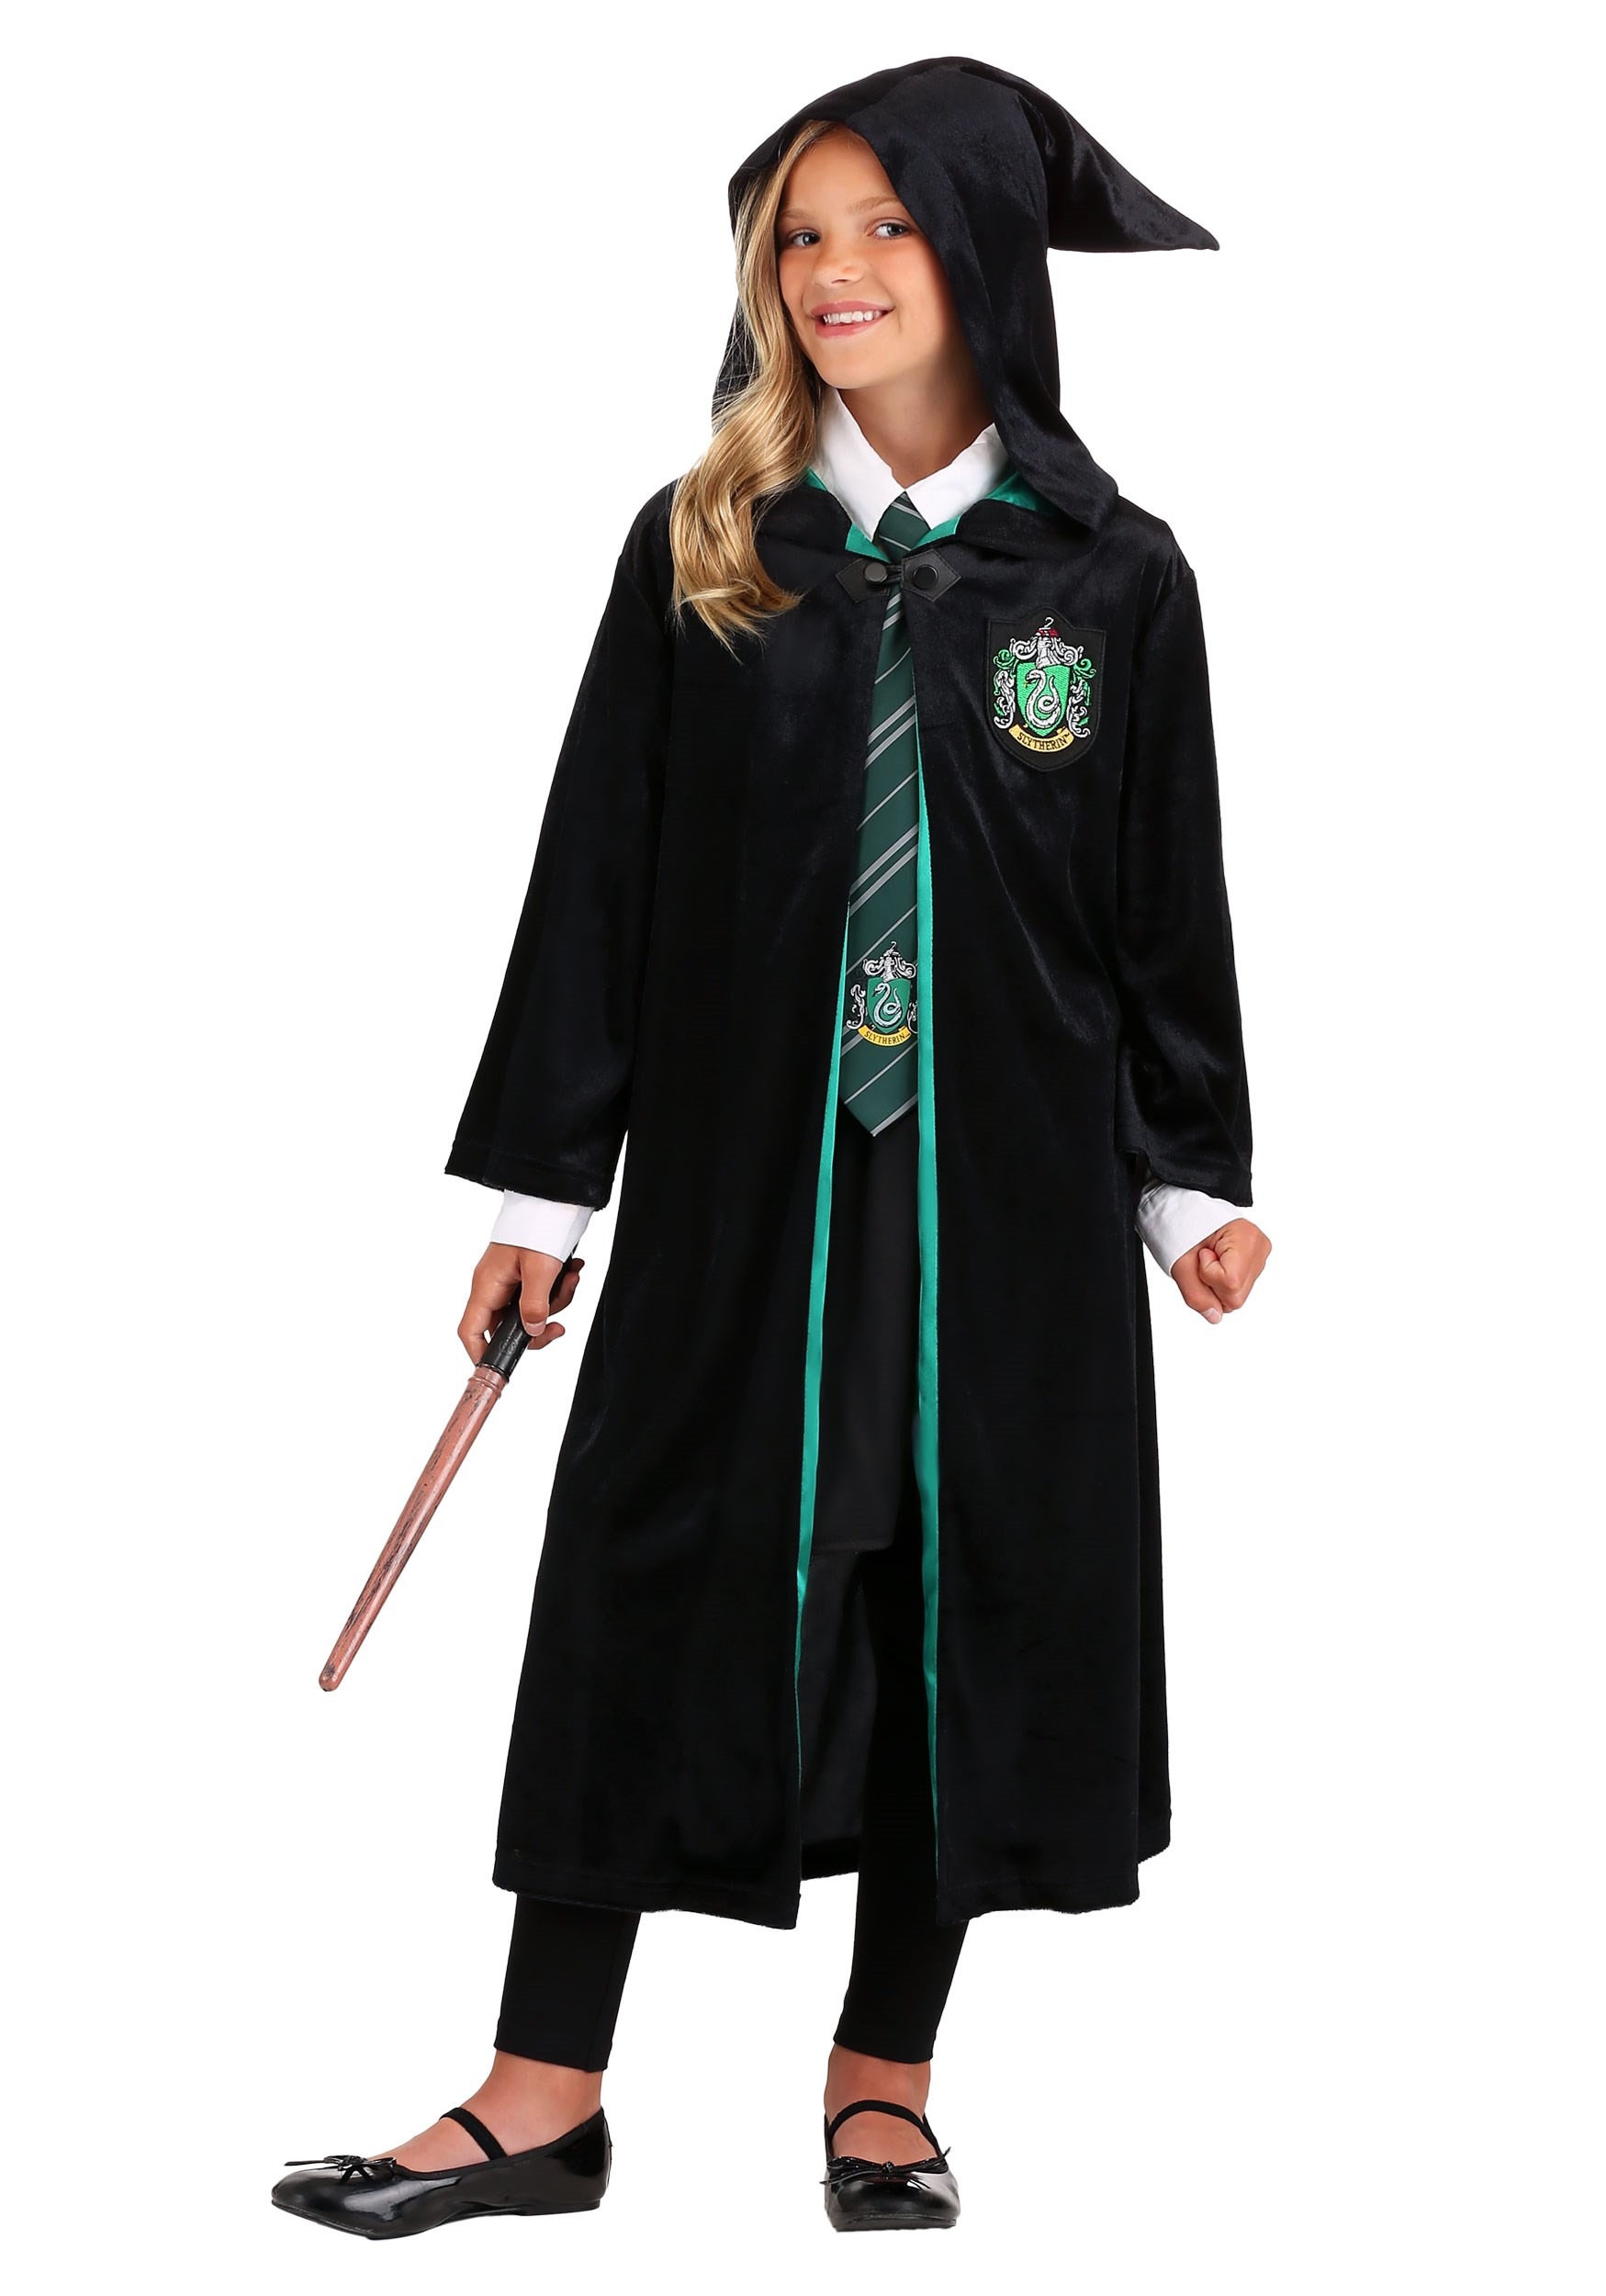  Jerry Leigh Harry Potter Toddler Deluxe Slytherin Robe :  Clothing, Shoes & Jewelry